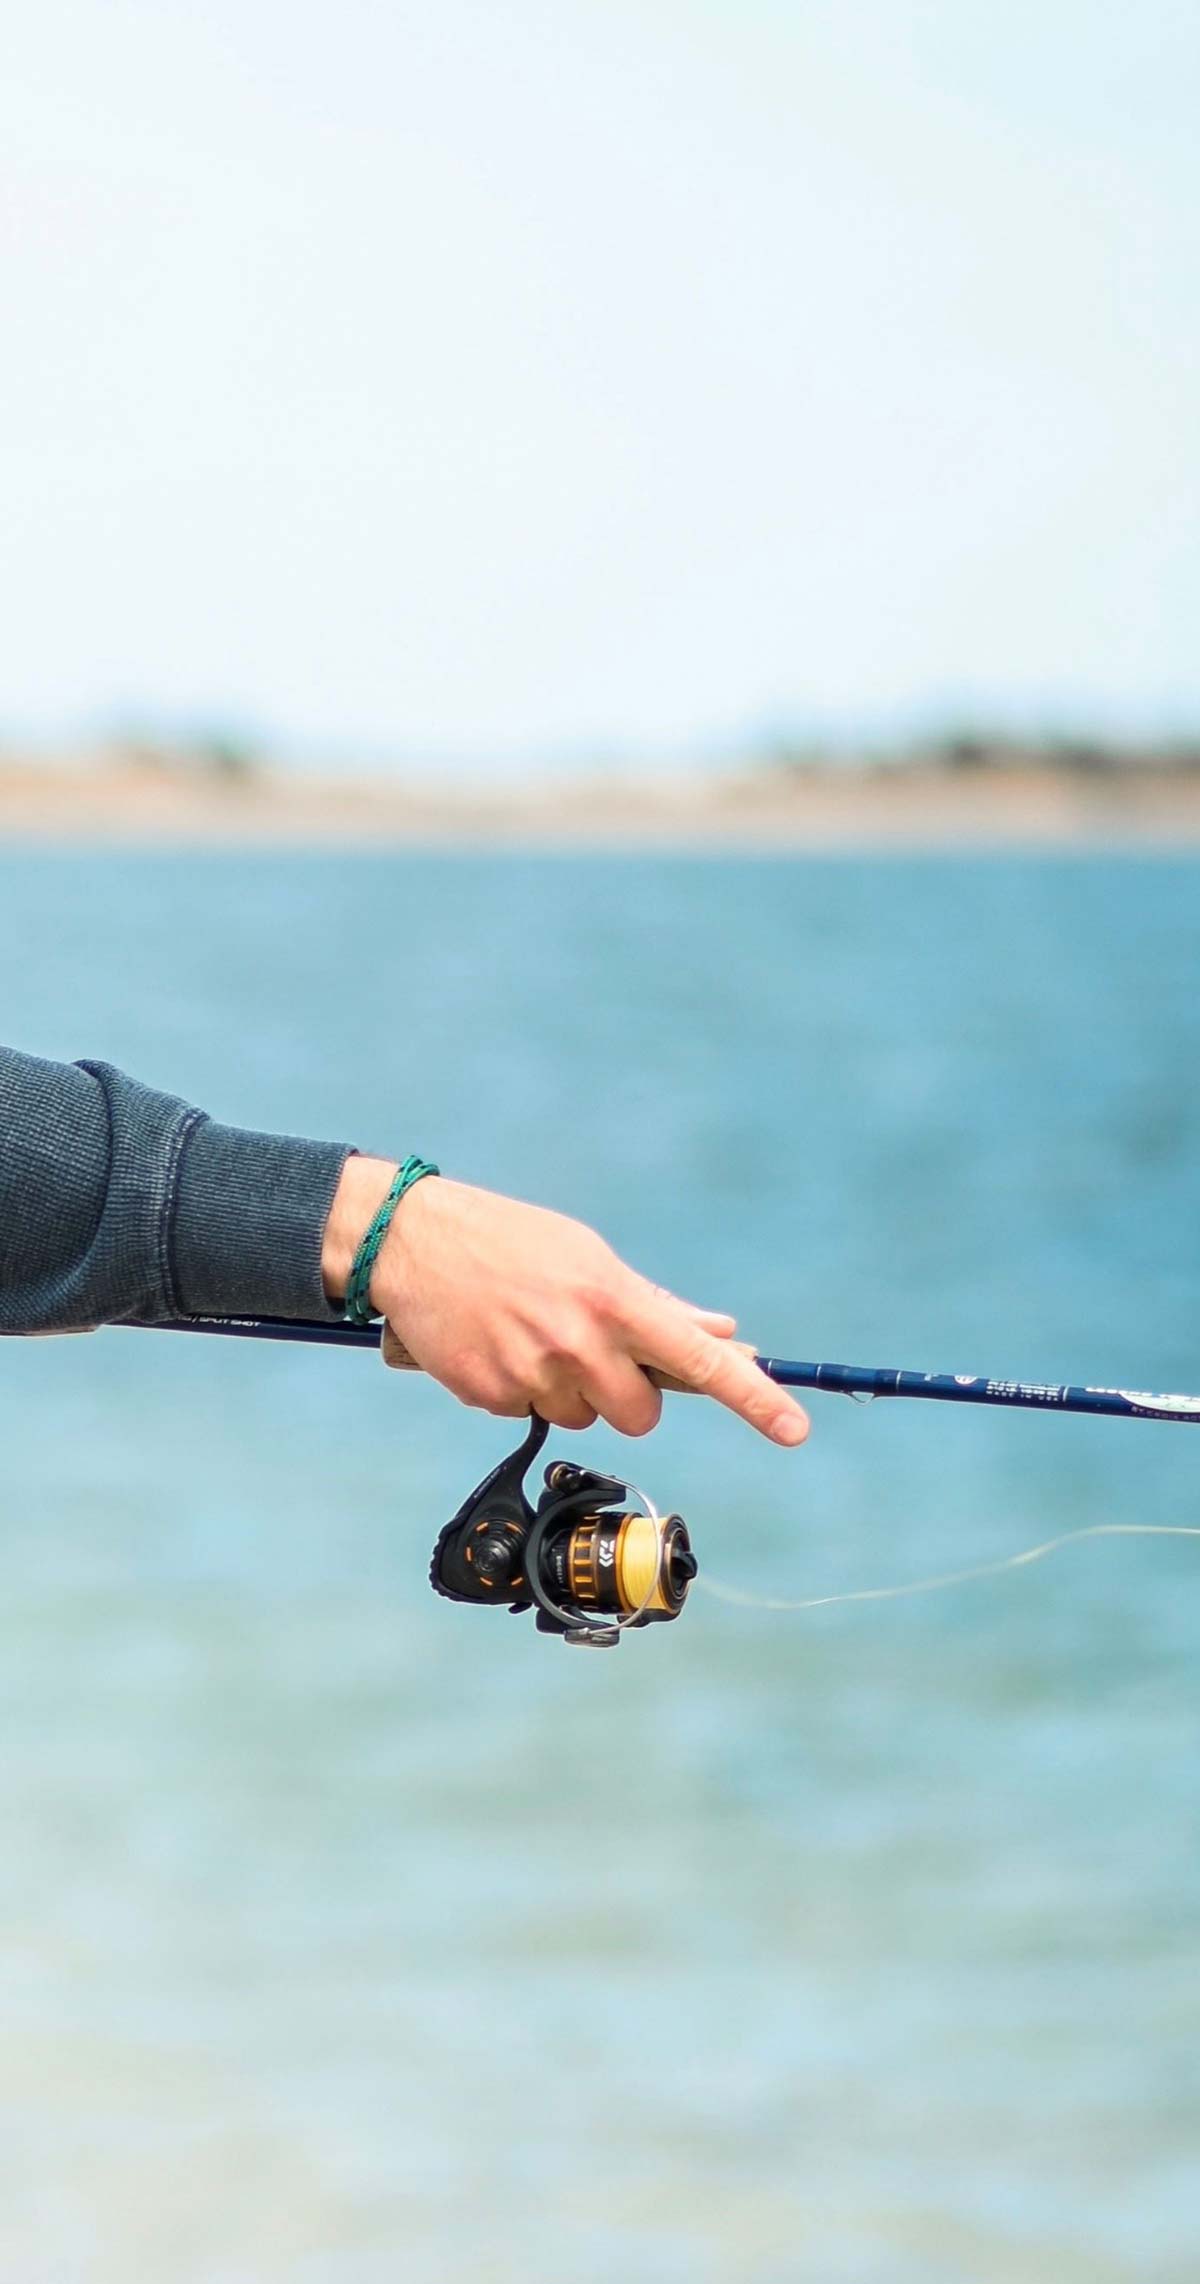 Tackle Tip: Wind Knots 101 - The Fisherman